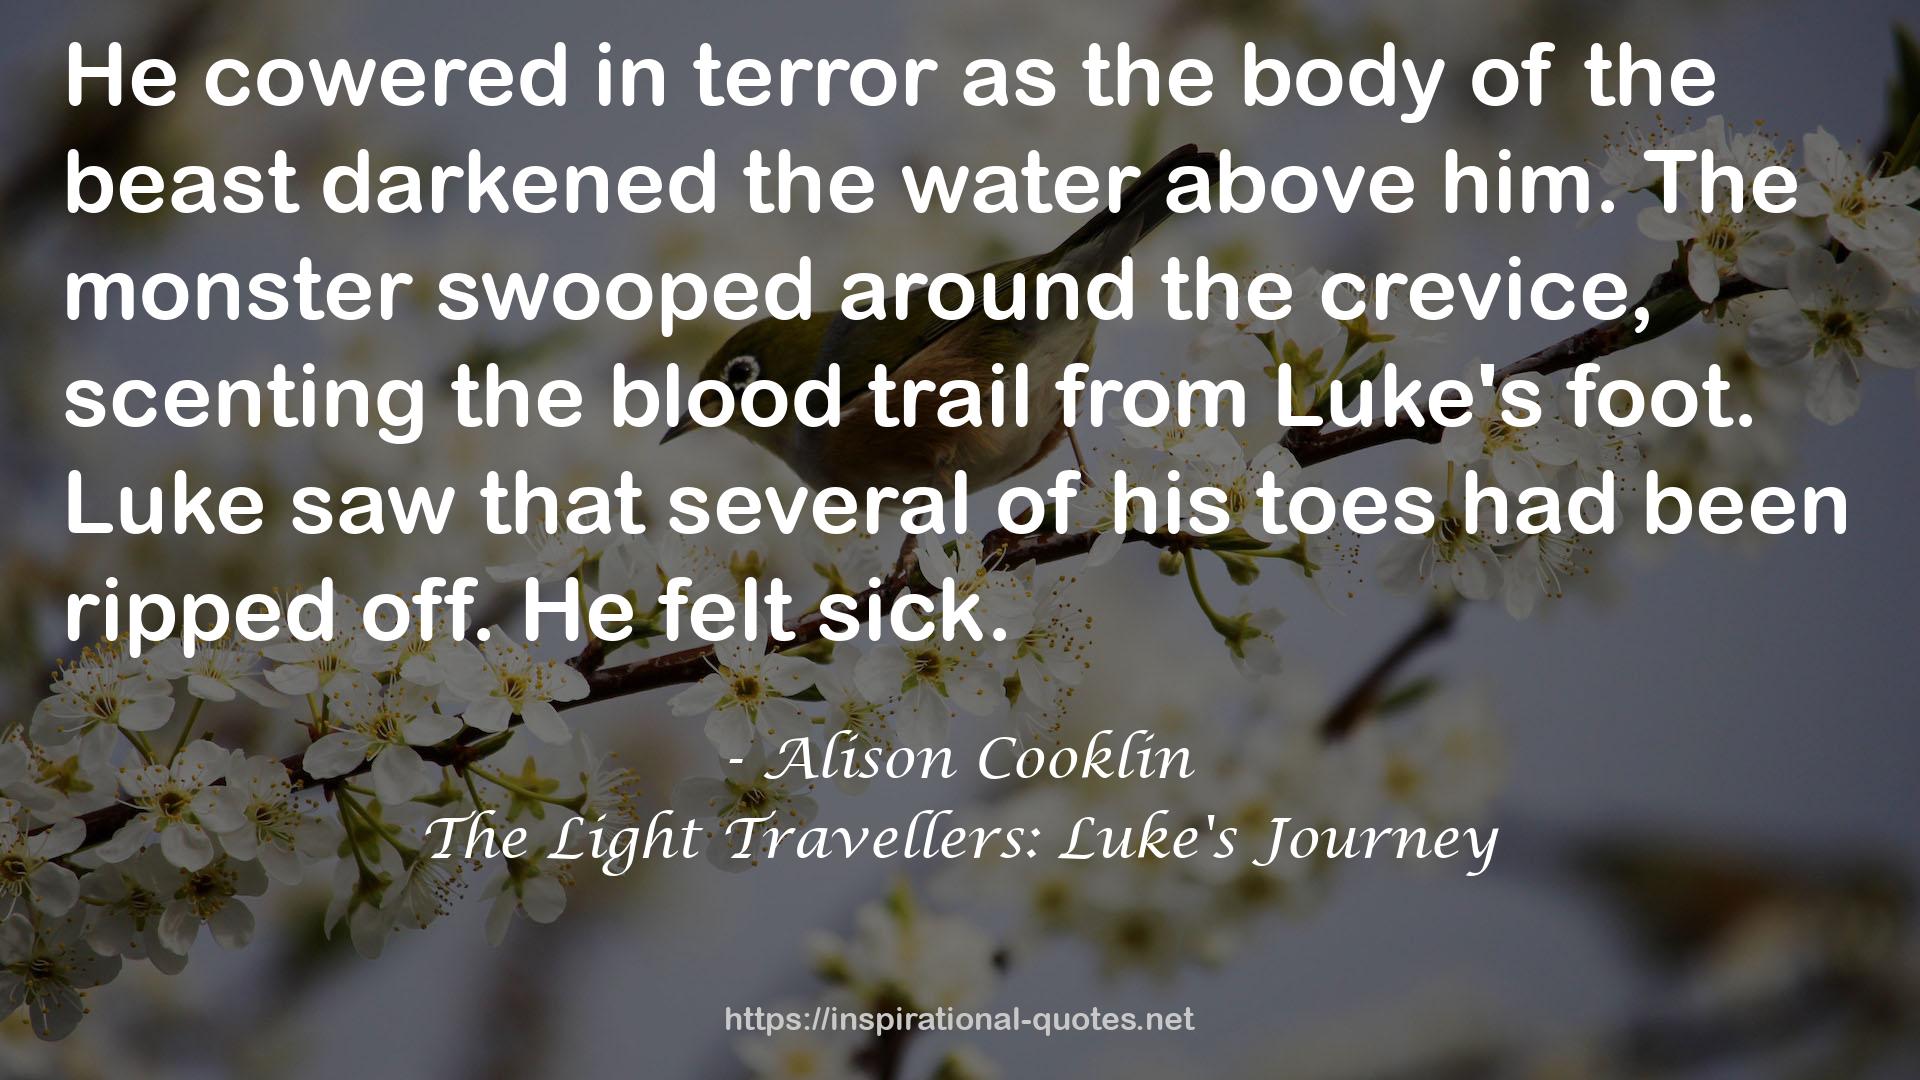 The Light Travellers: Luke's Journey QUOTES